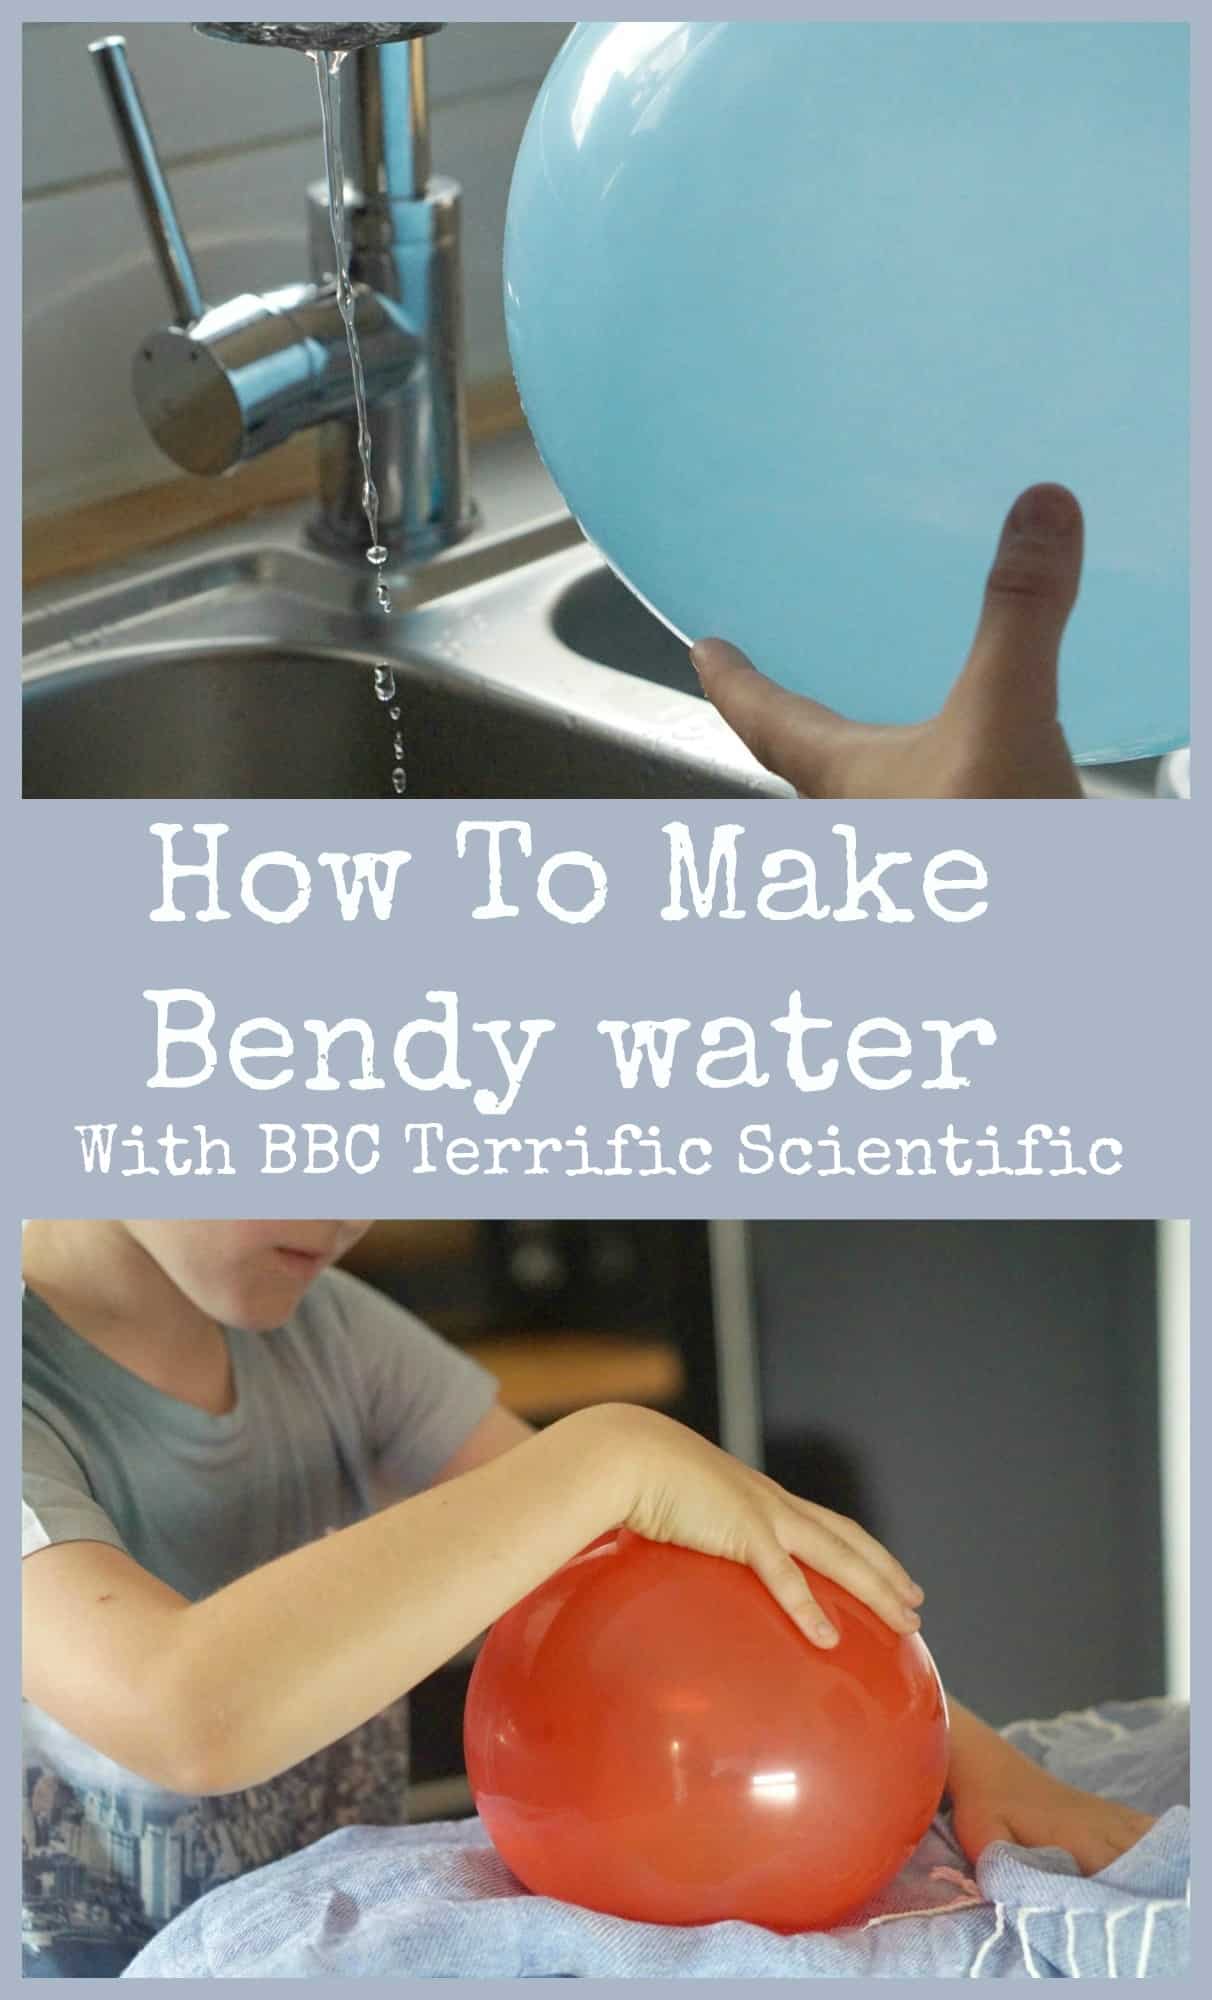 Cool Science, How to Make Bendy Water with Terrific Scientific